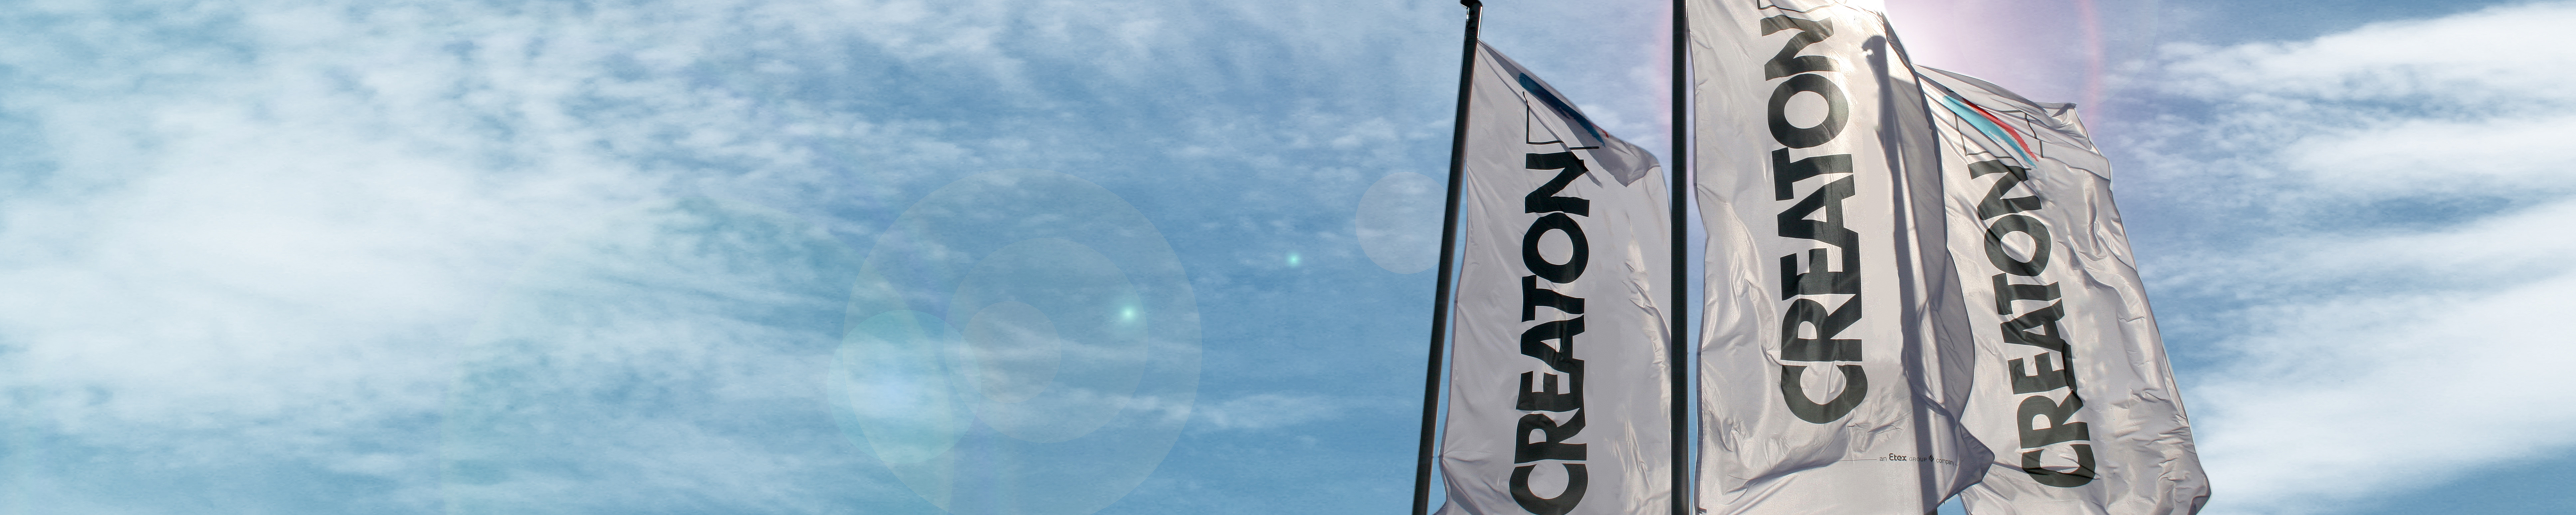 CREATON Flags with blue sky